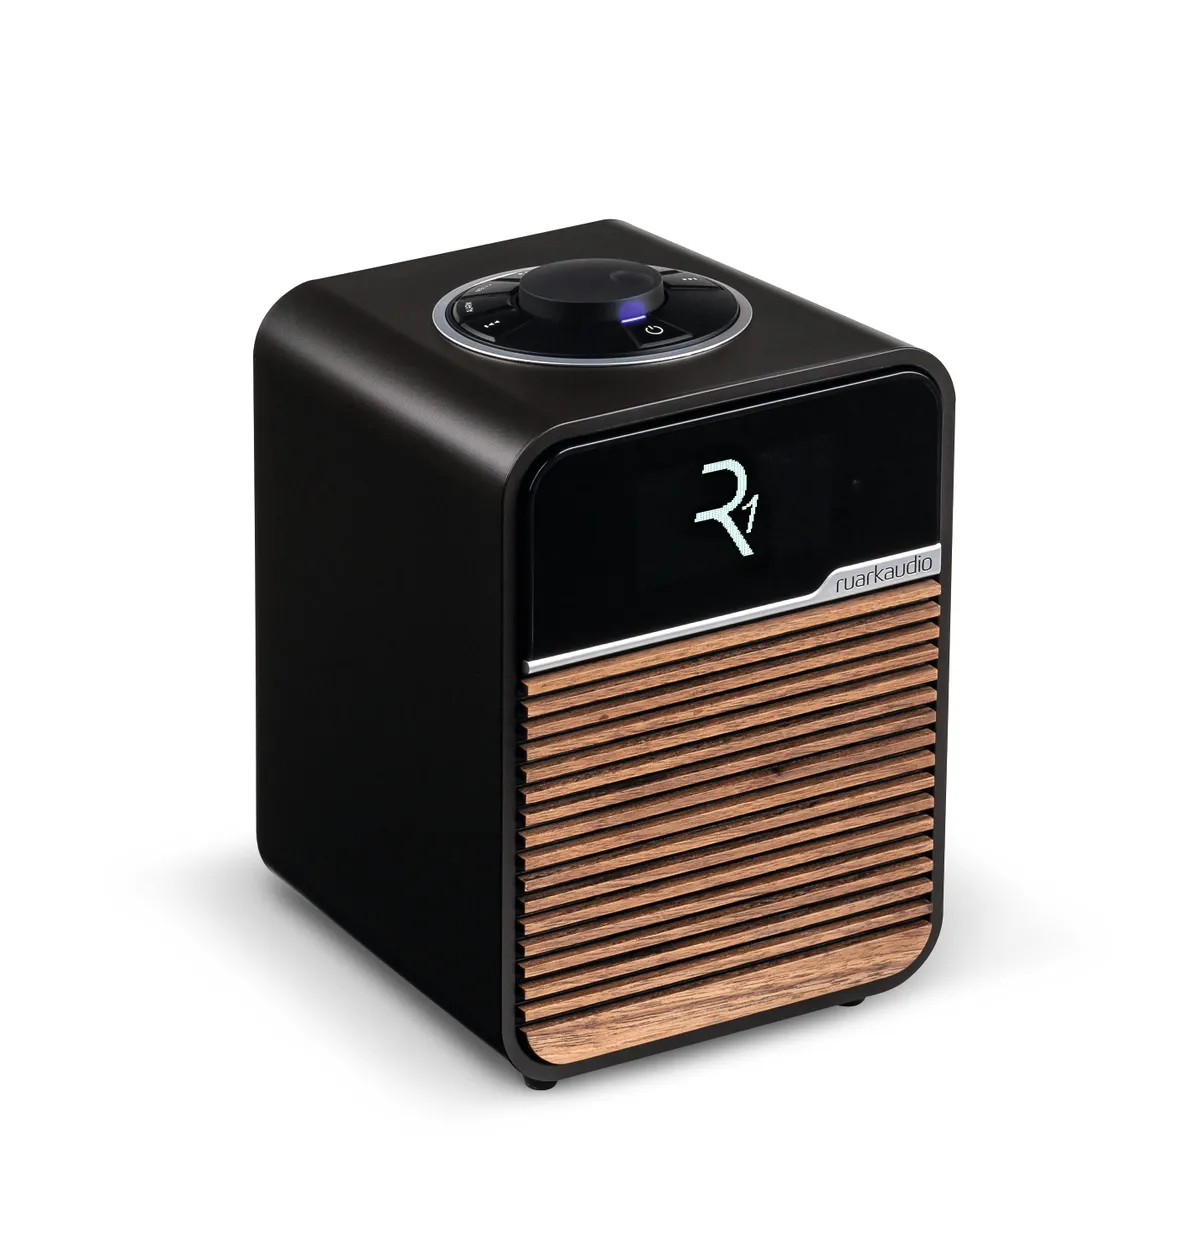 3 of the best DAB radios on the market today reviewed - Classical Music